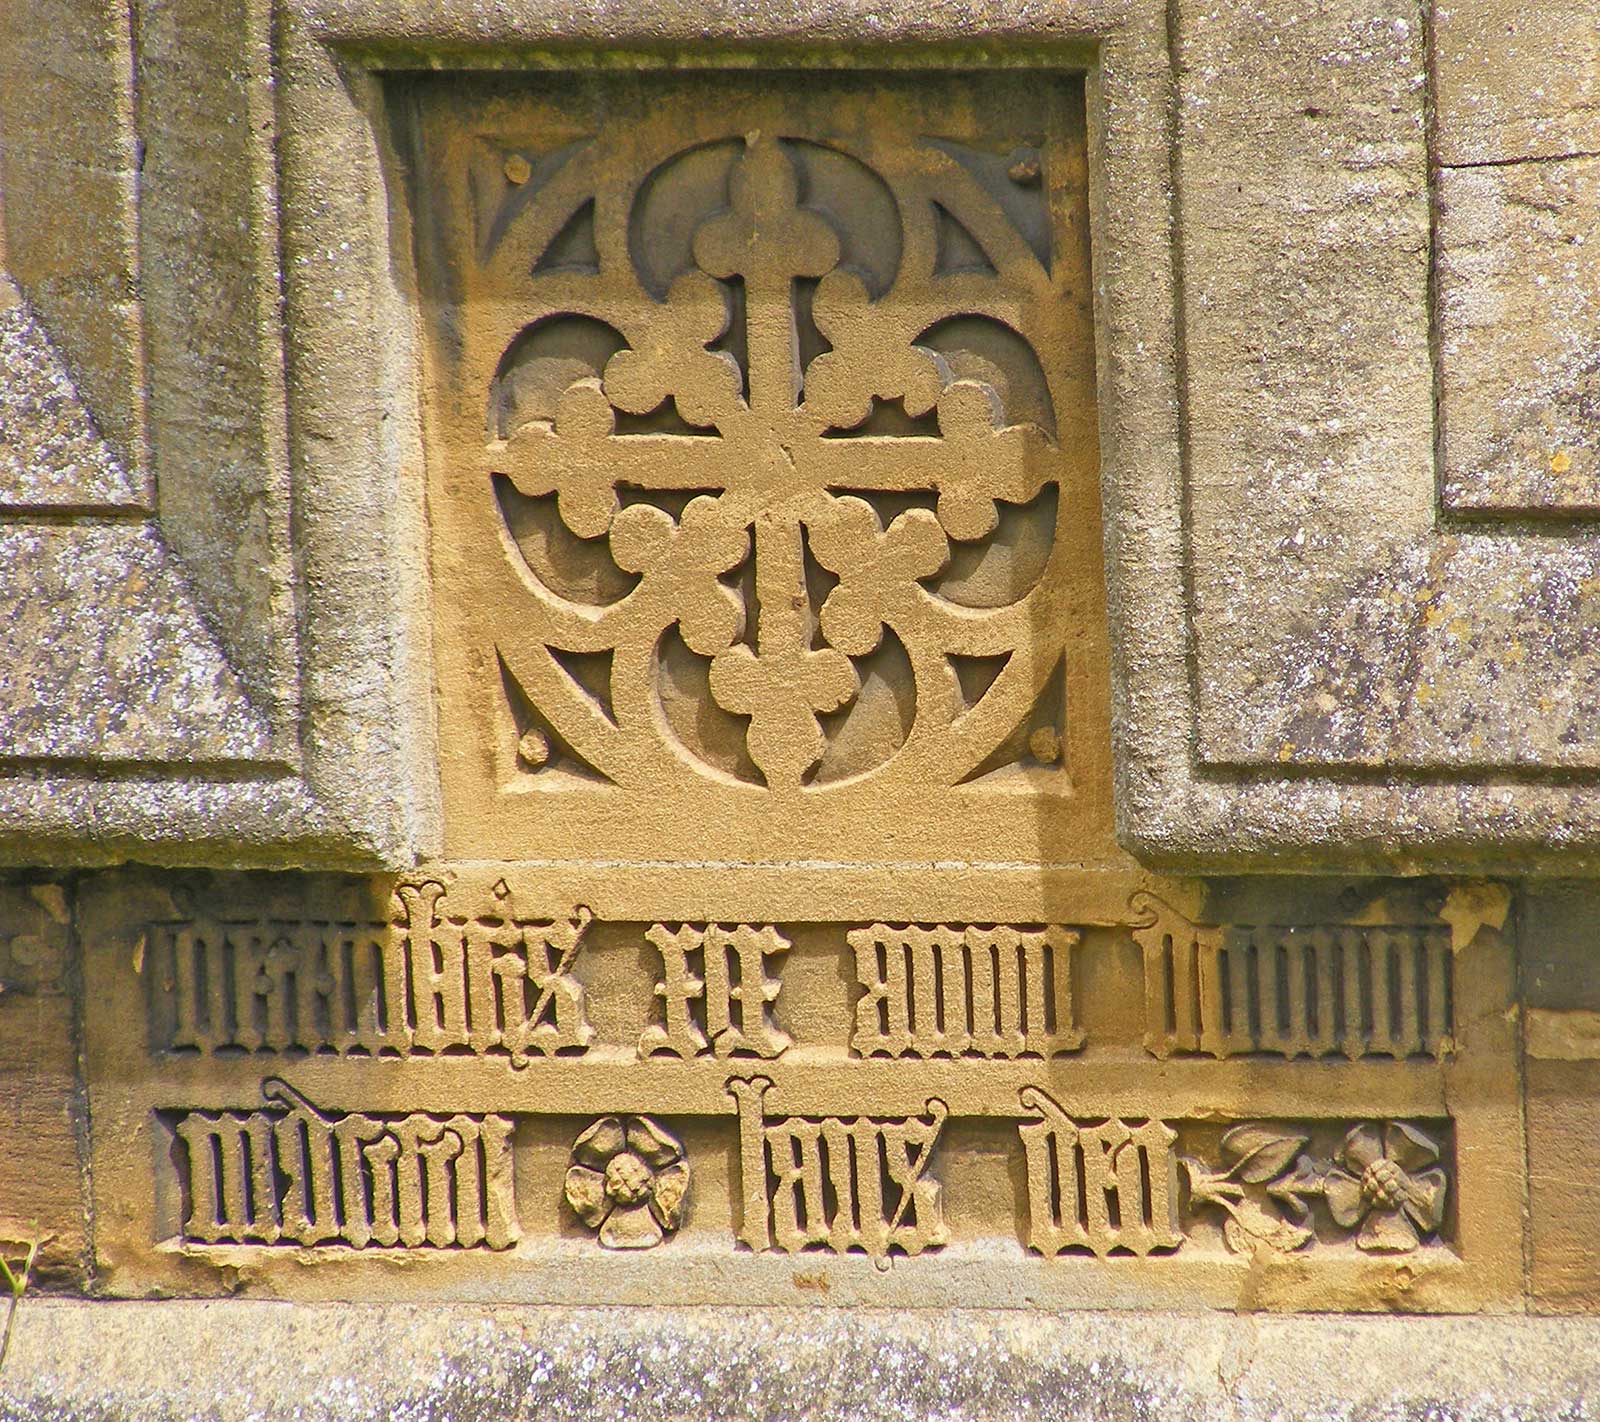 Foundation stone of the Church of the Ascension